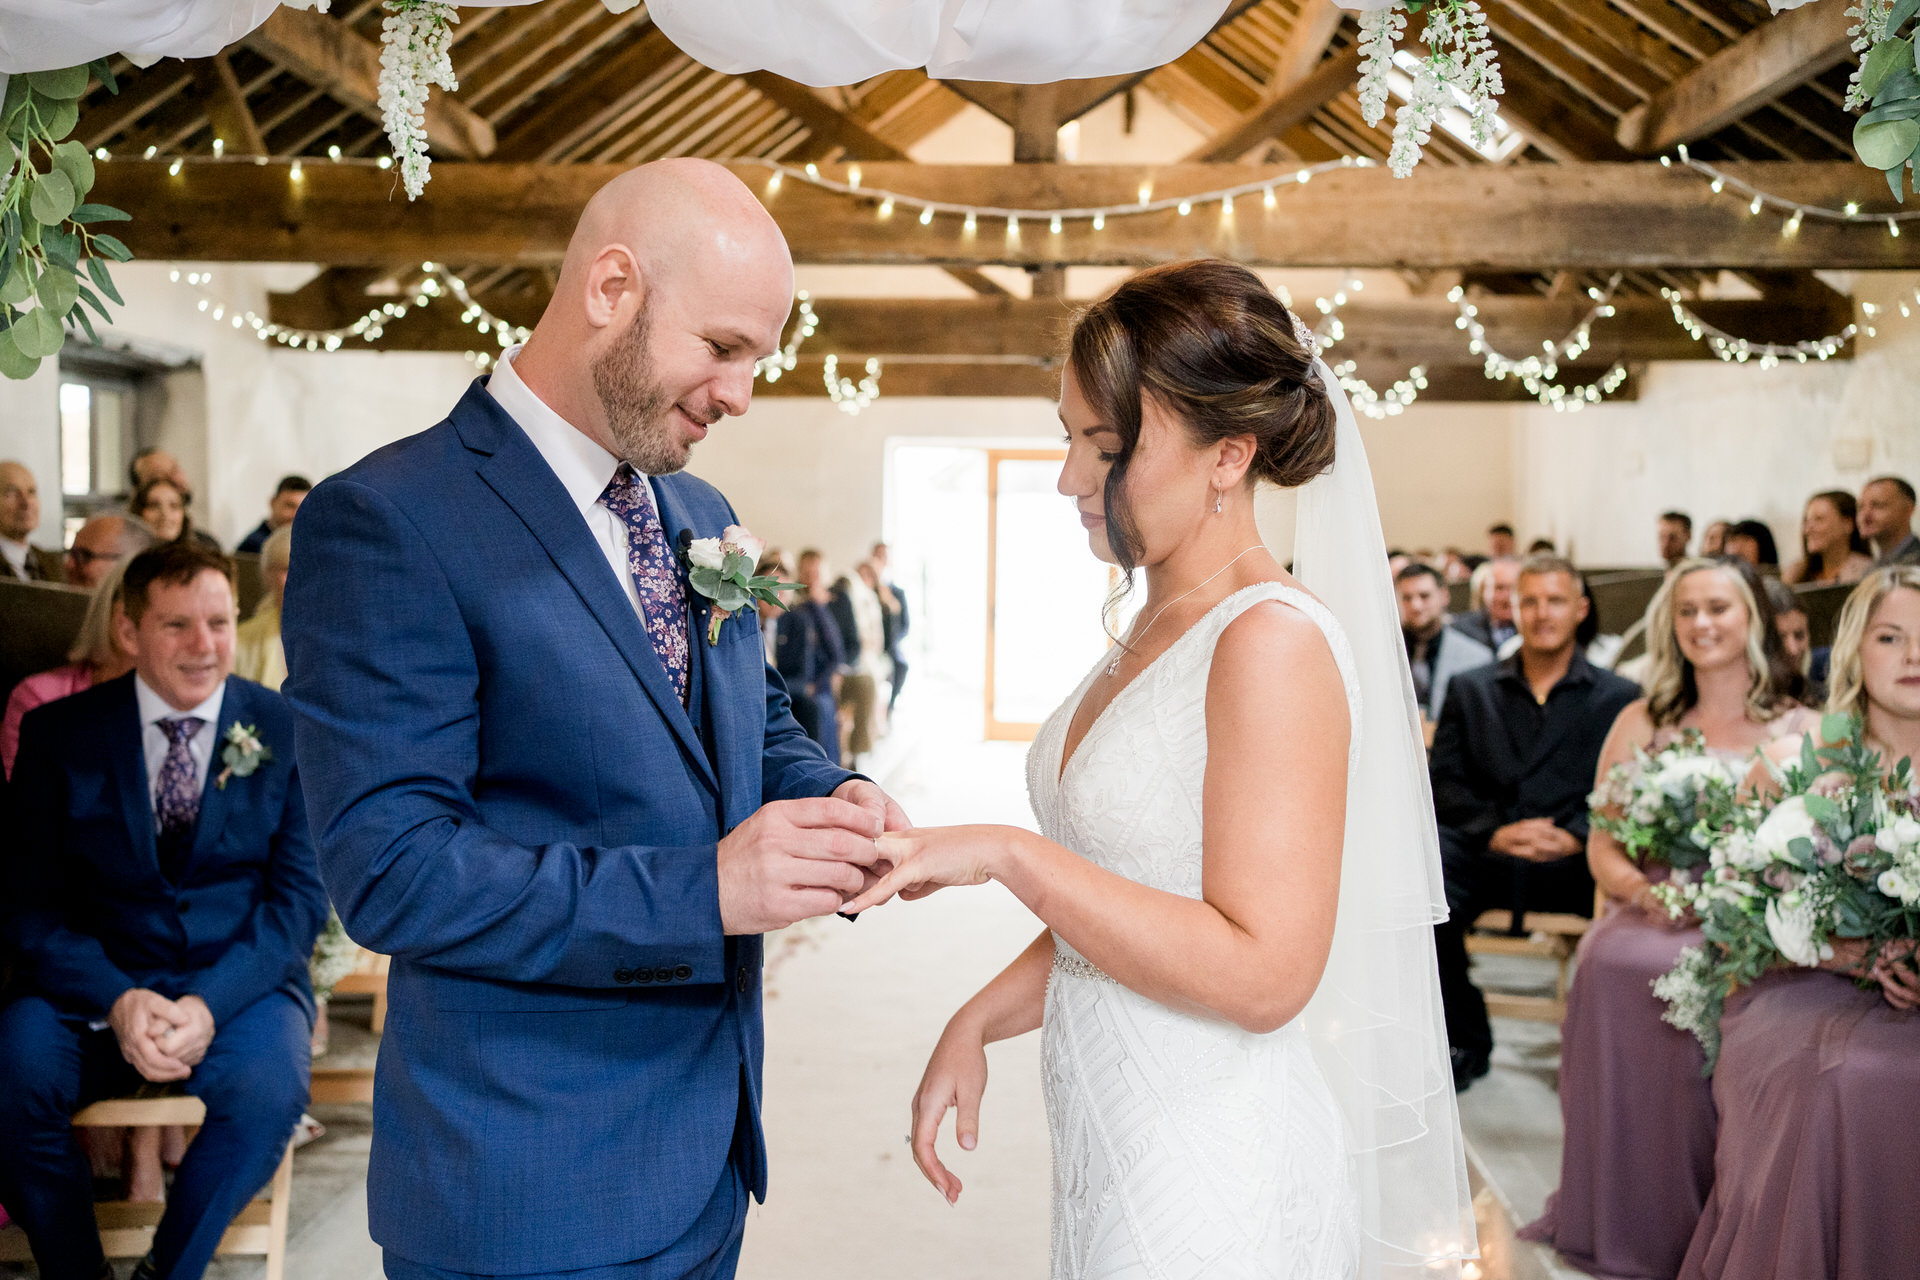 exchanging rings in Fairbanks wedding barn ceremony